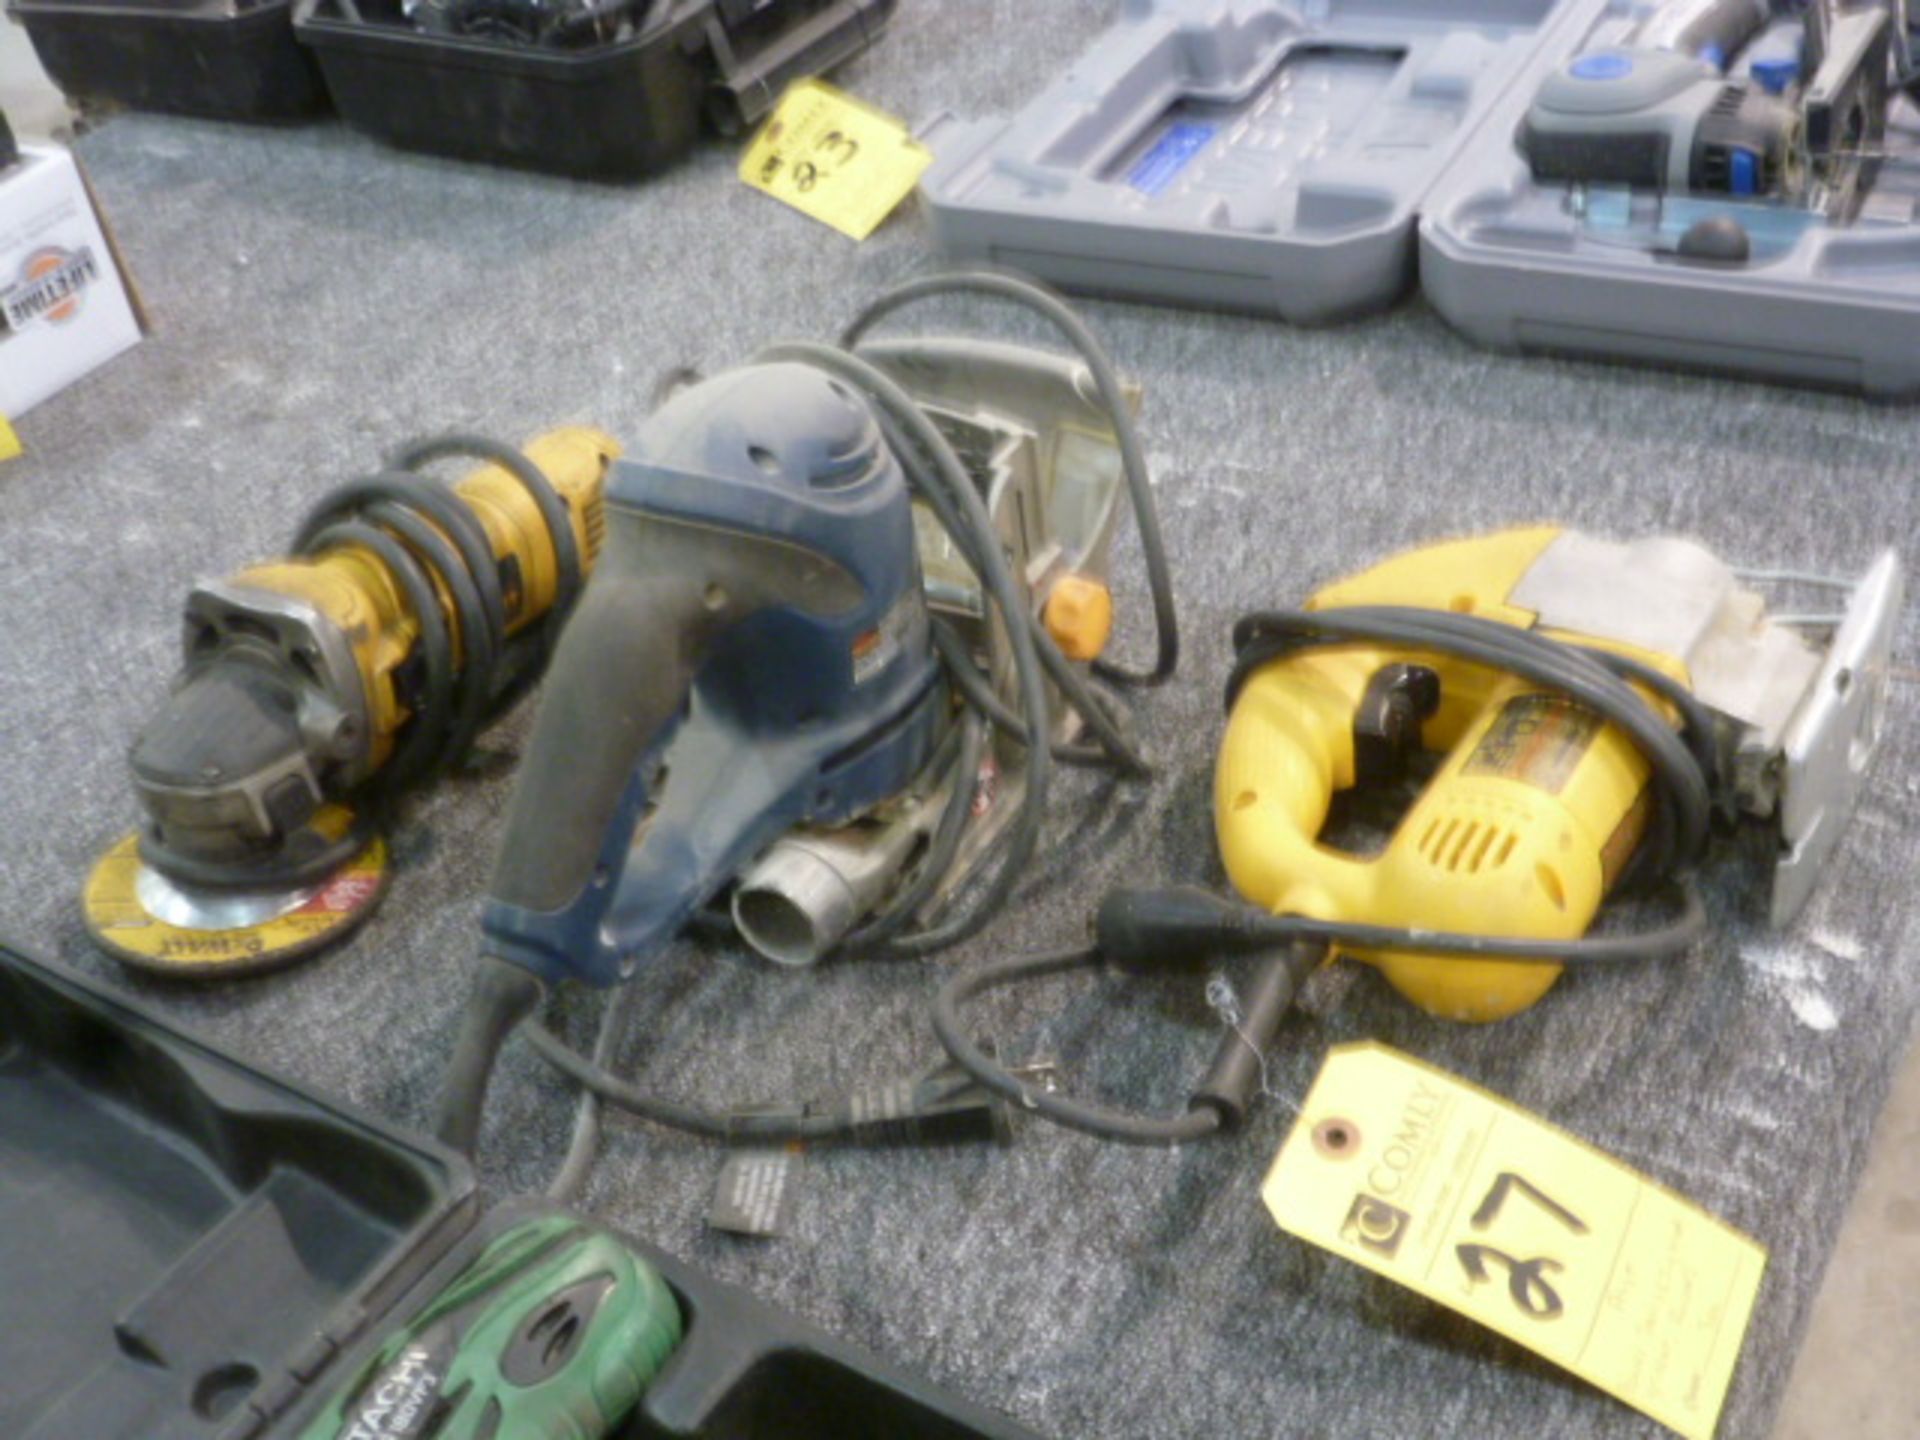 Power Tools: Jigsaw, Grinder, Router (3 Each)